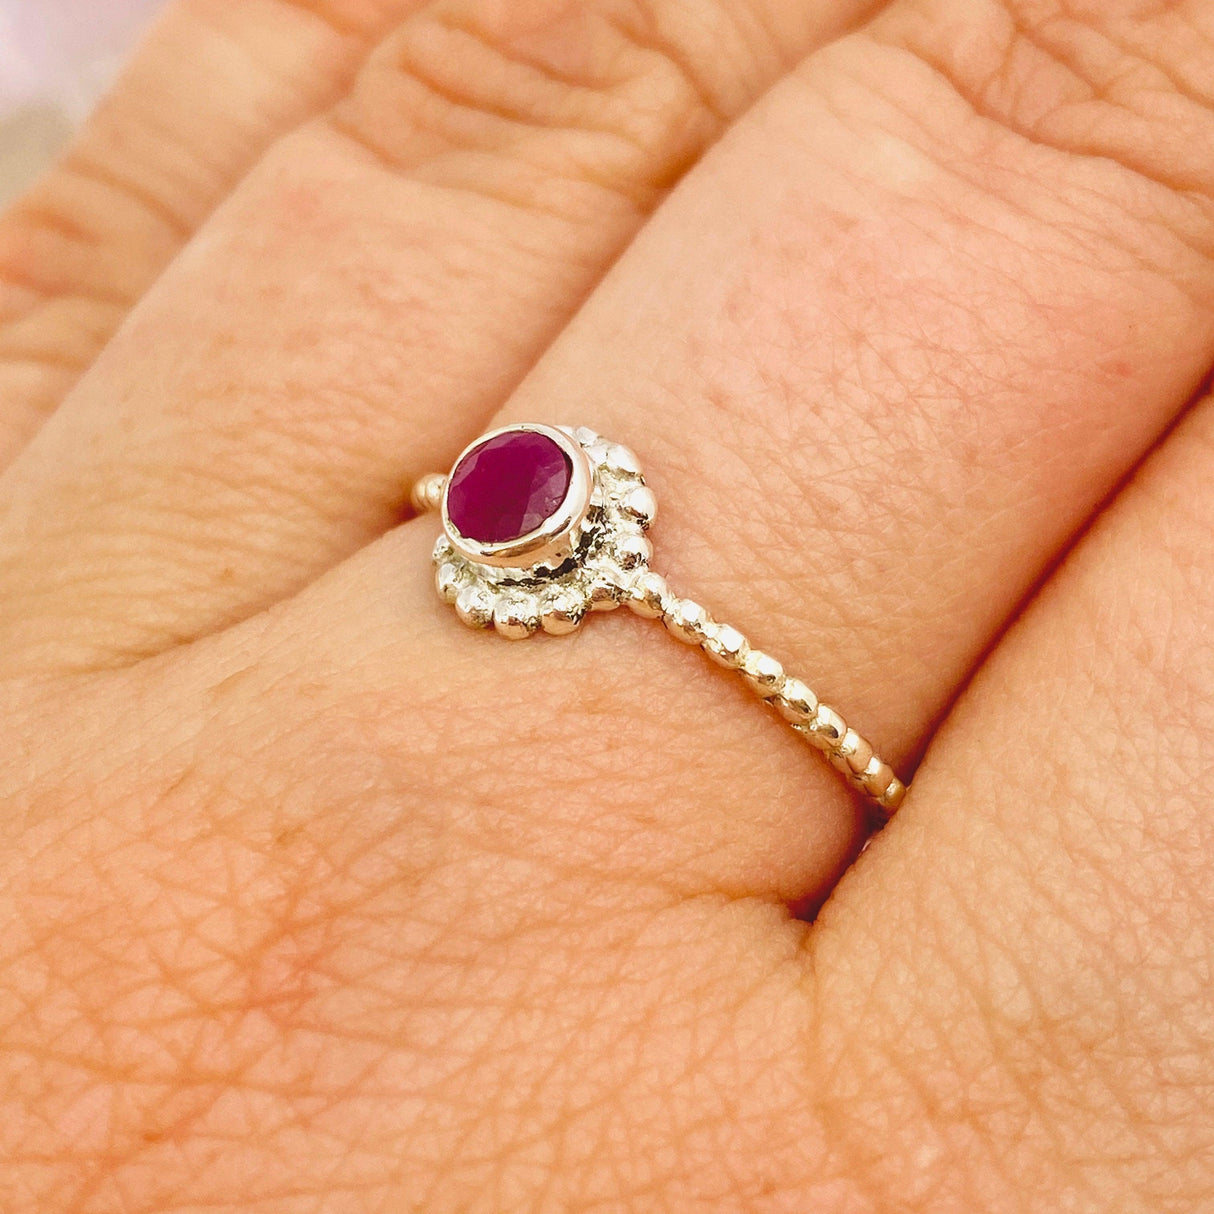 Ruby Round Faceted Fine Band Ring with Detailed Silver SettingR3692-RU - Nature's Magick